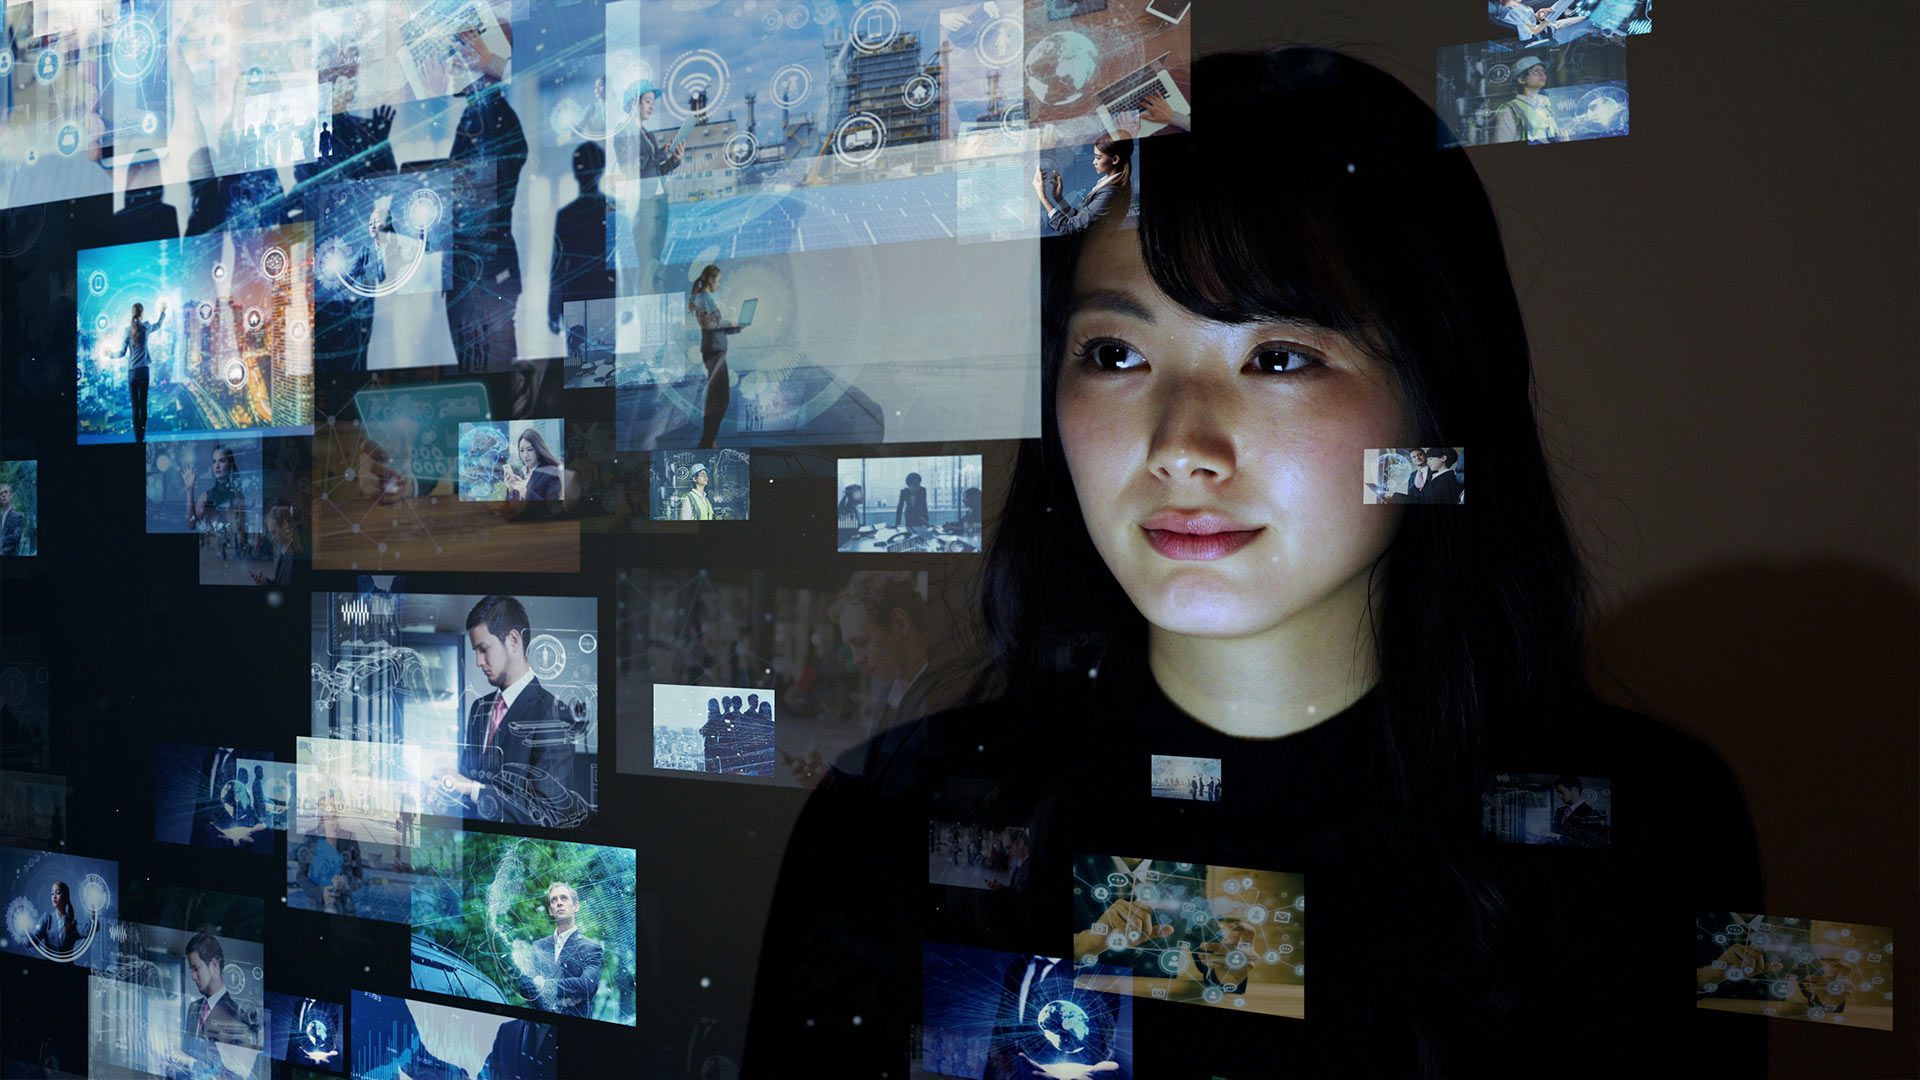 Asian woman viewing many screens of information floating in front of her